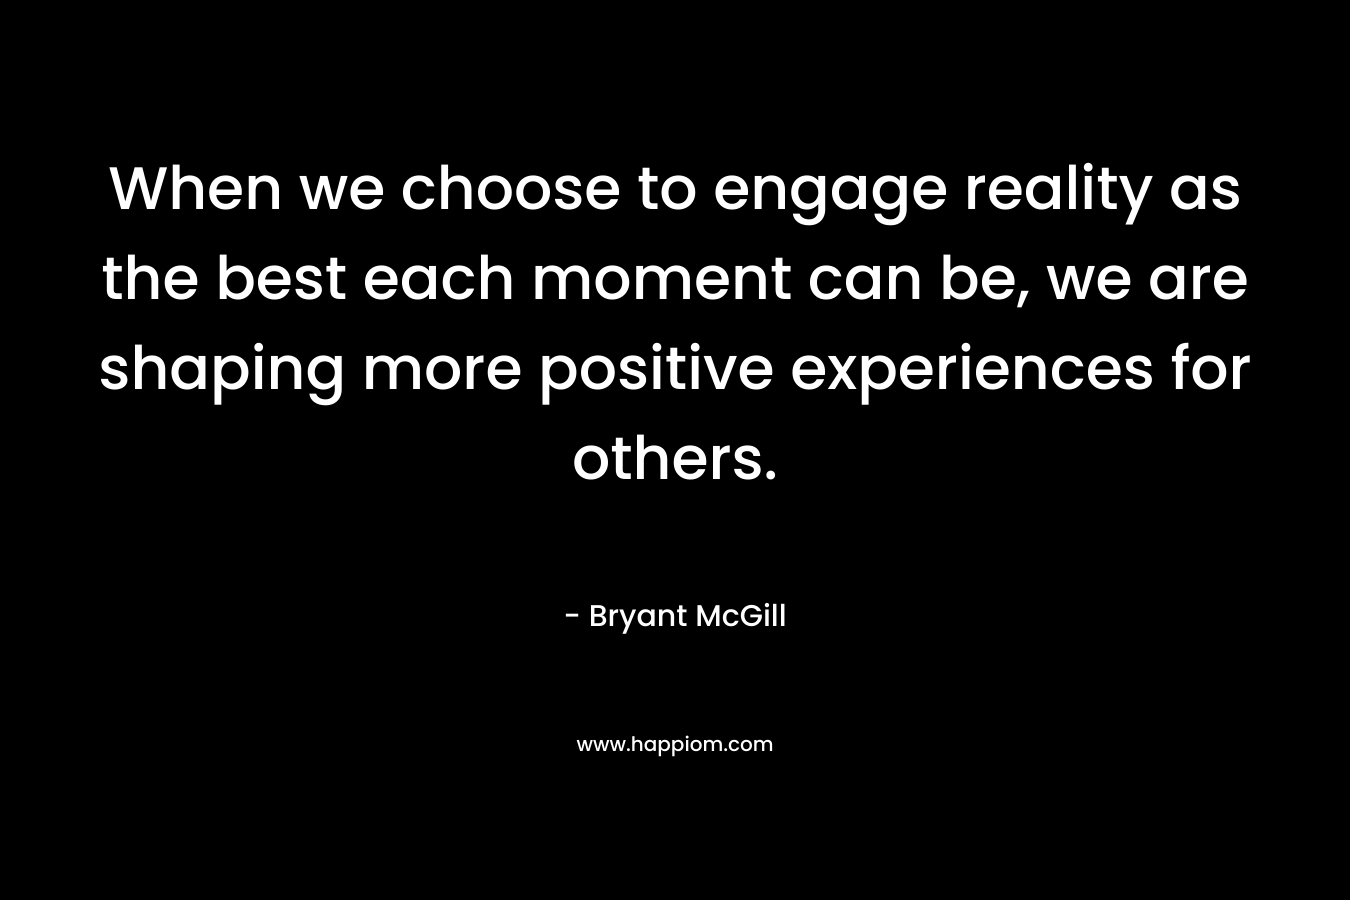 When we choose to engage reality as the best each moment can be, we are shaping more positive experiences for others.